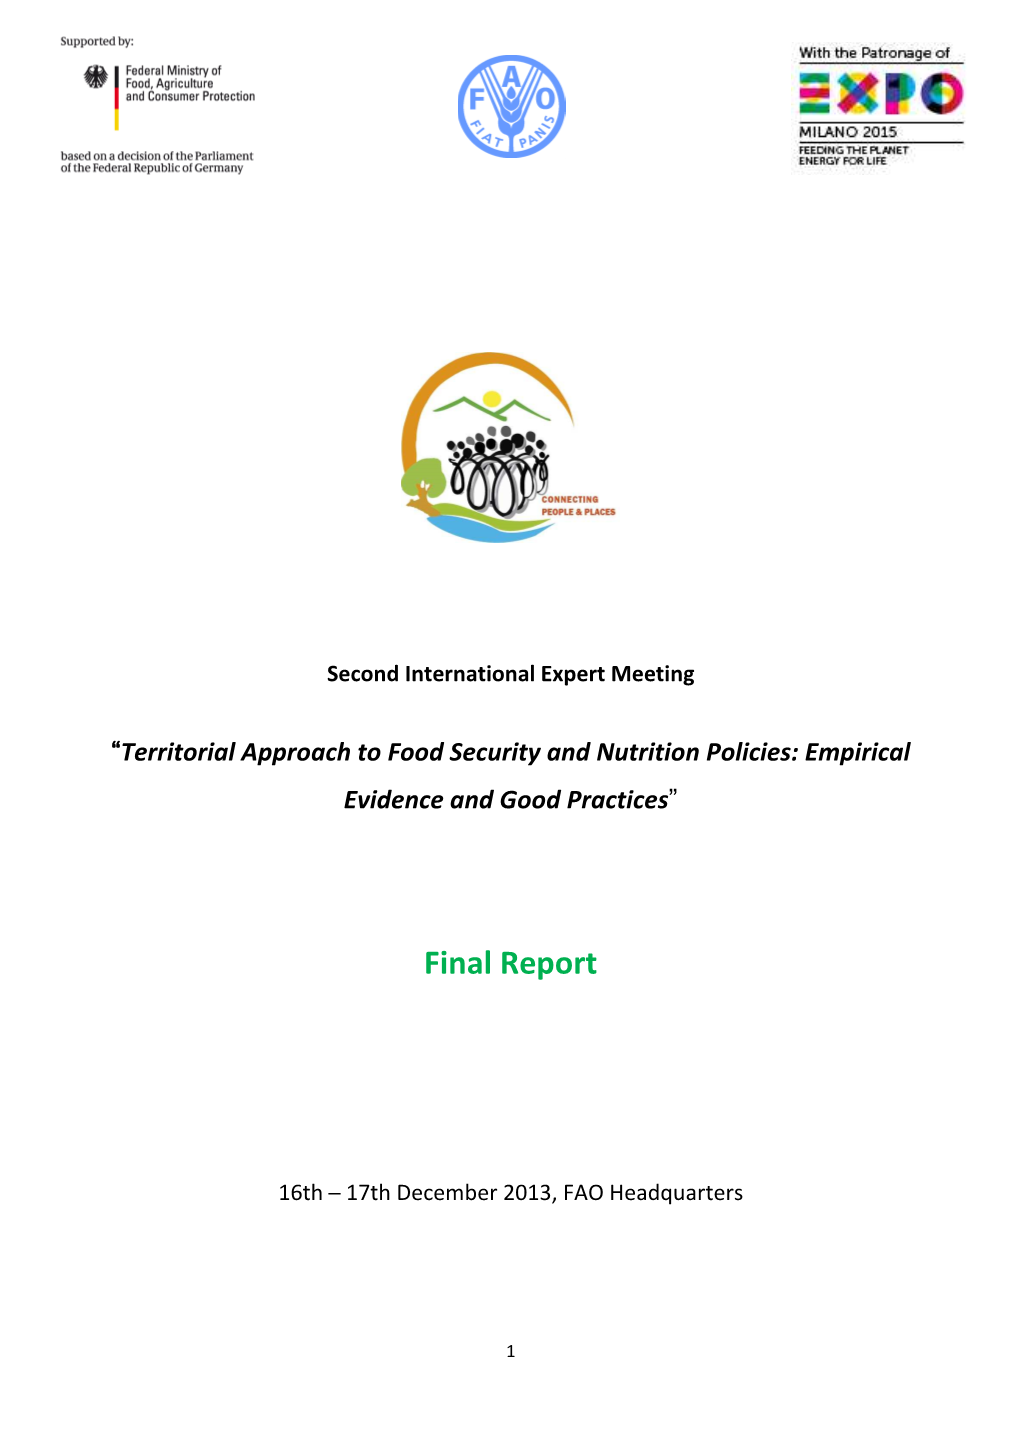 Territorial Approach to Food Security and Nutrition Policies: Empirical Evidence and Good Practices”